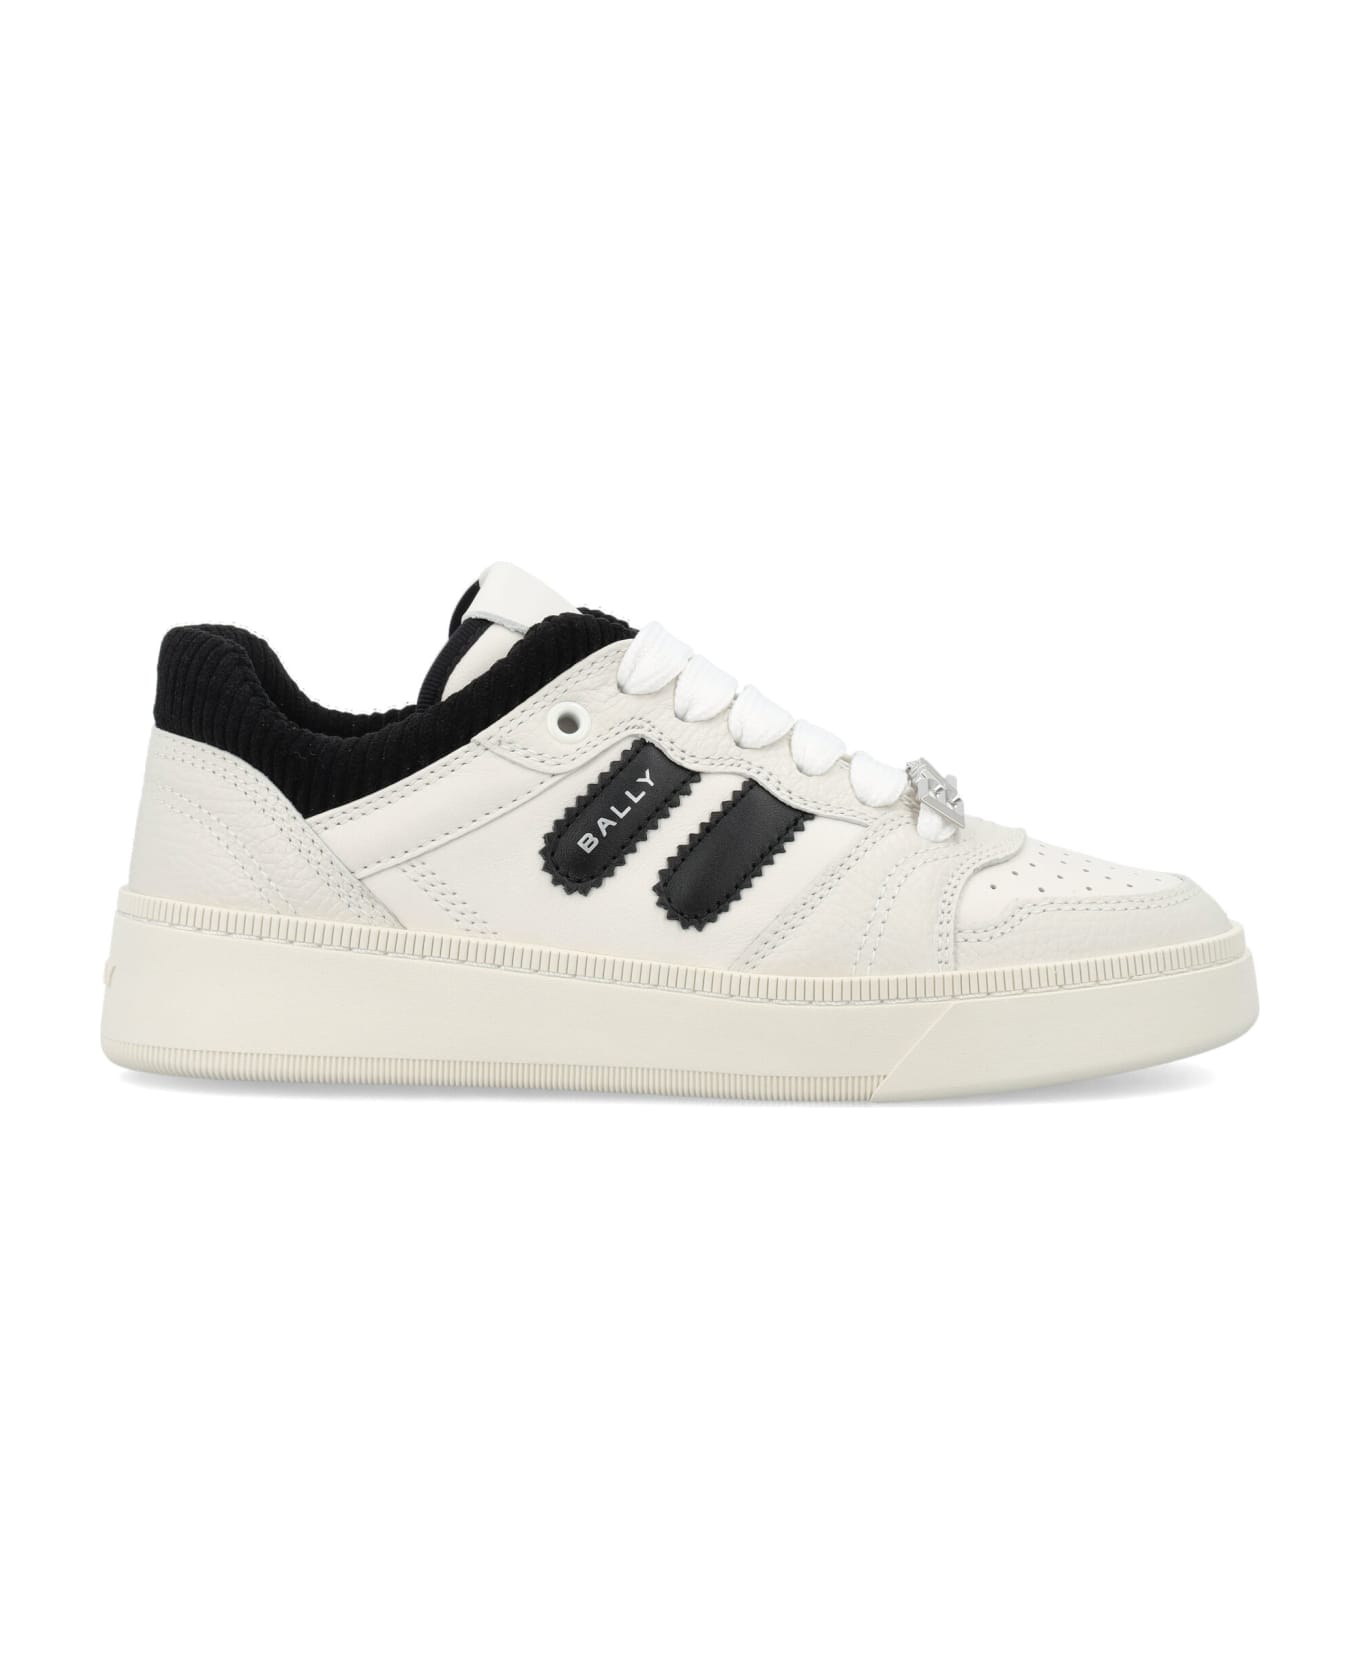 Bally Royalty-w Leather Sneakers - WHITE/BLACK